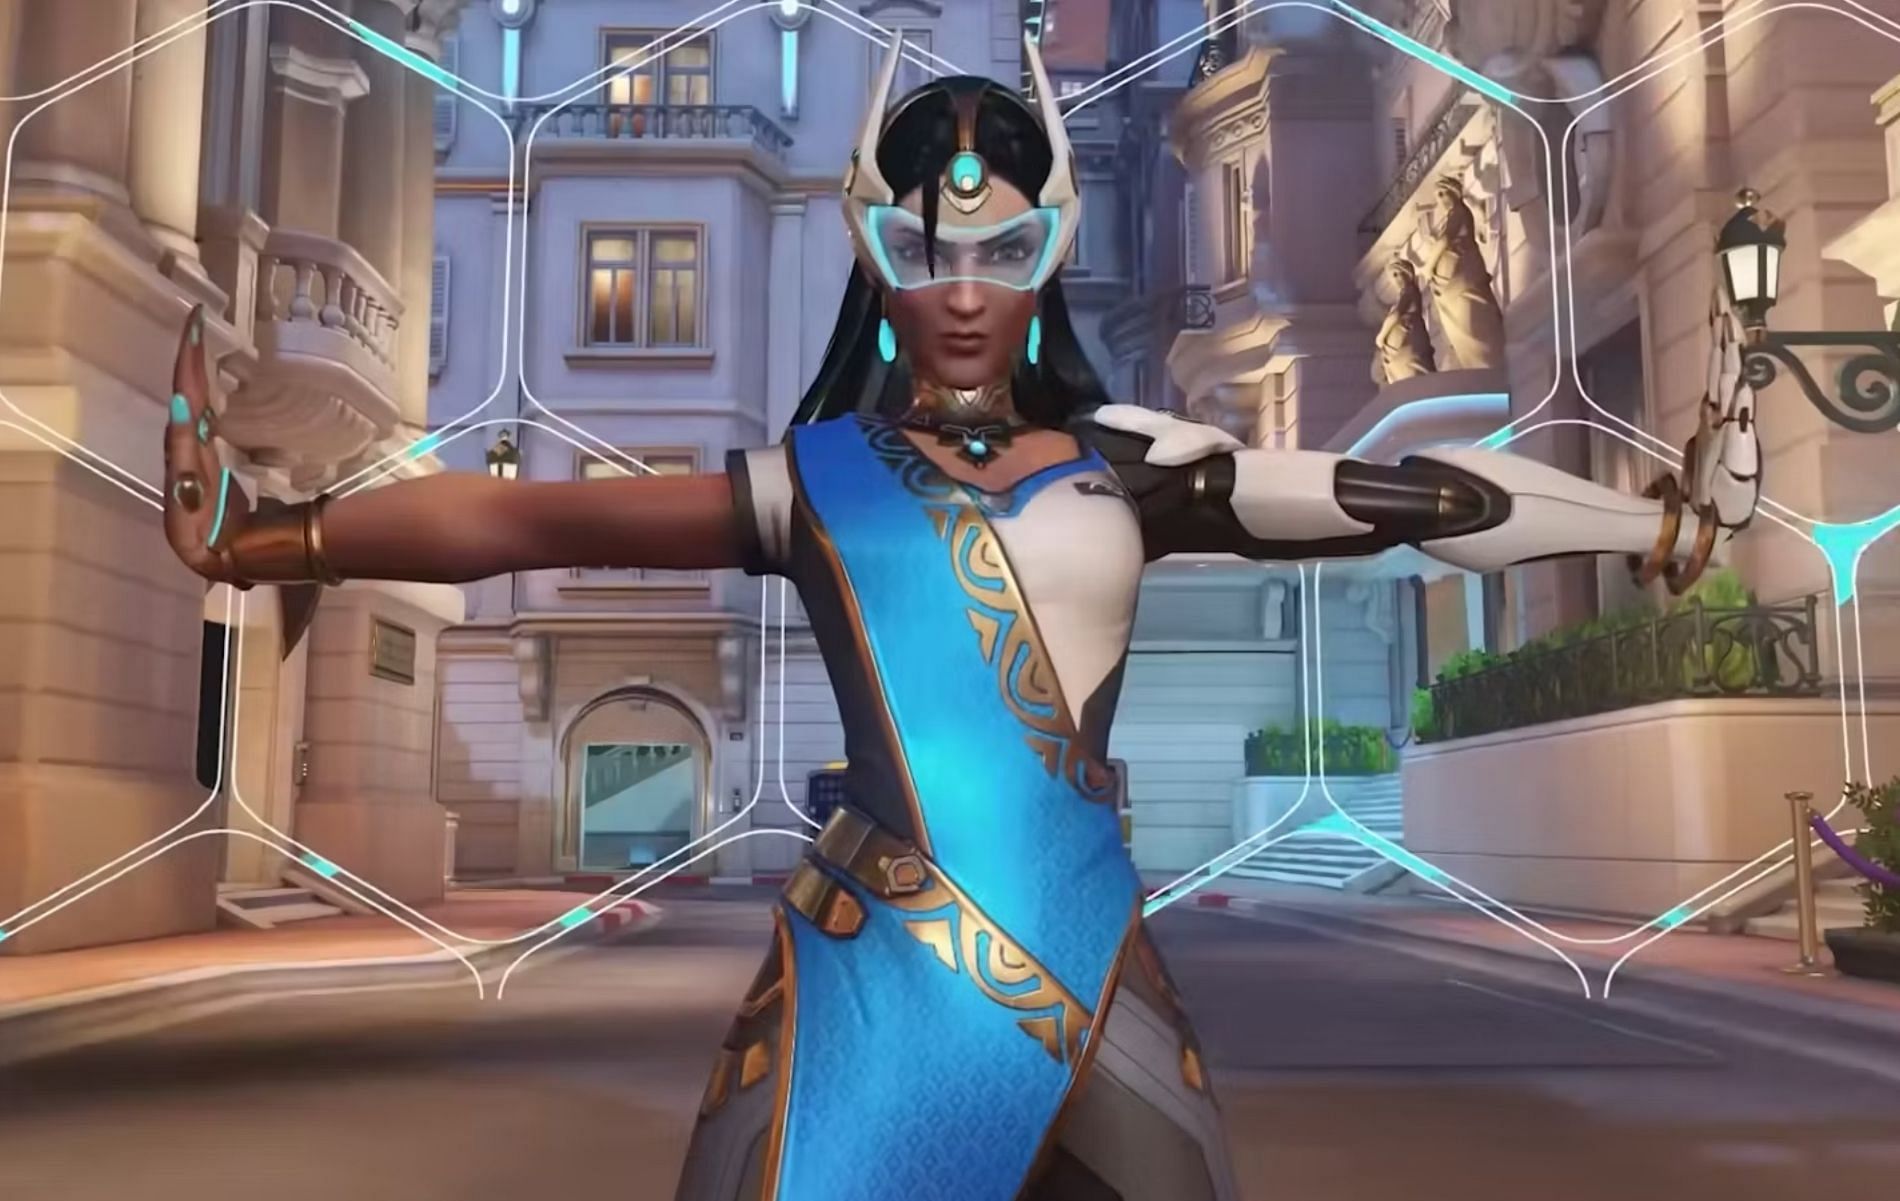 Originally a support hero, Symmetra has gone through many changes over the years in Overwatch history, and now she is one of the most balanced DPS characters (Image via Blizzard Entertainment)